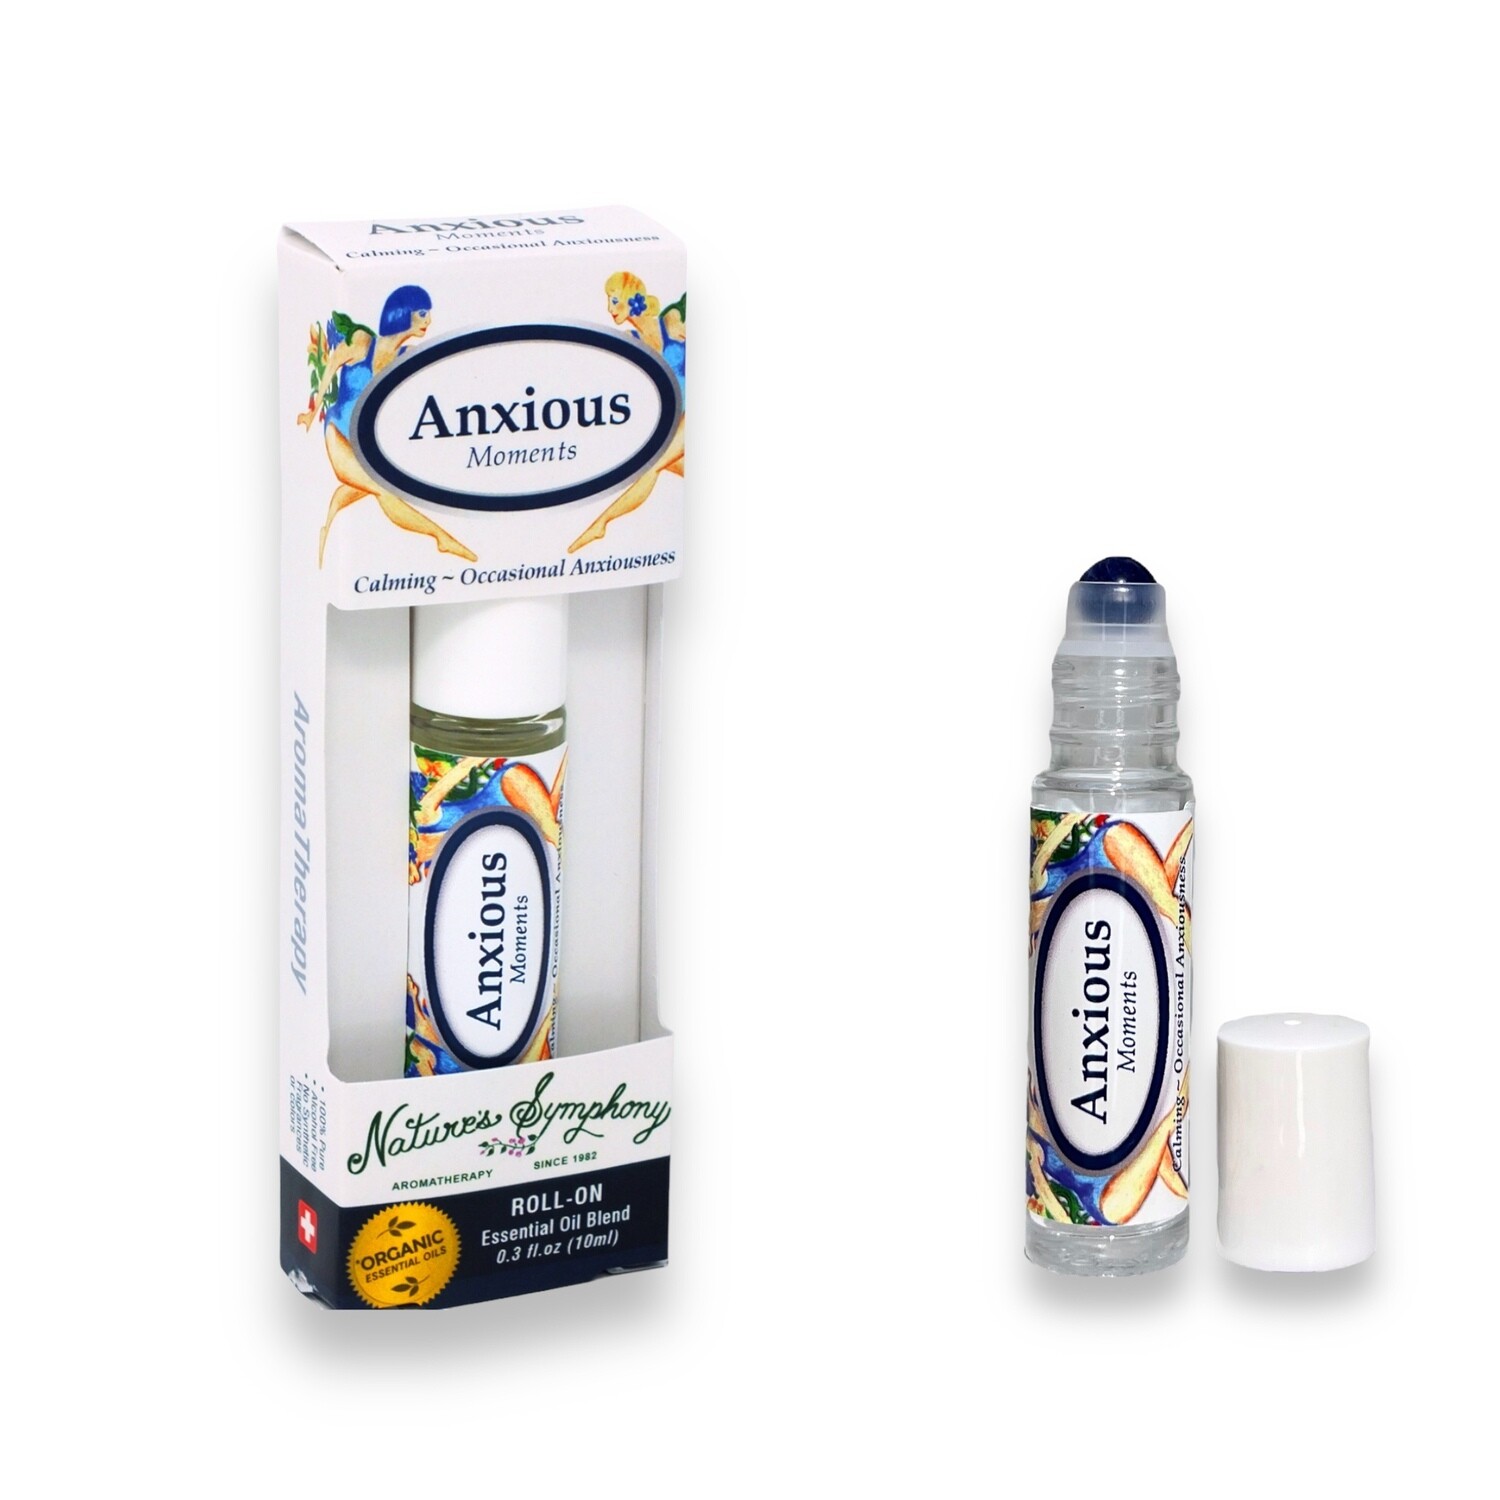 Anxious Moments Blend, Roll-On, Blend Organic/Wildcrafted - 10ml